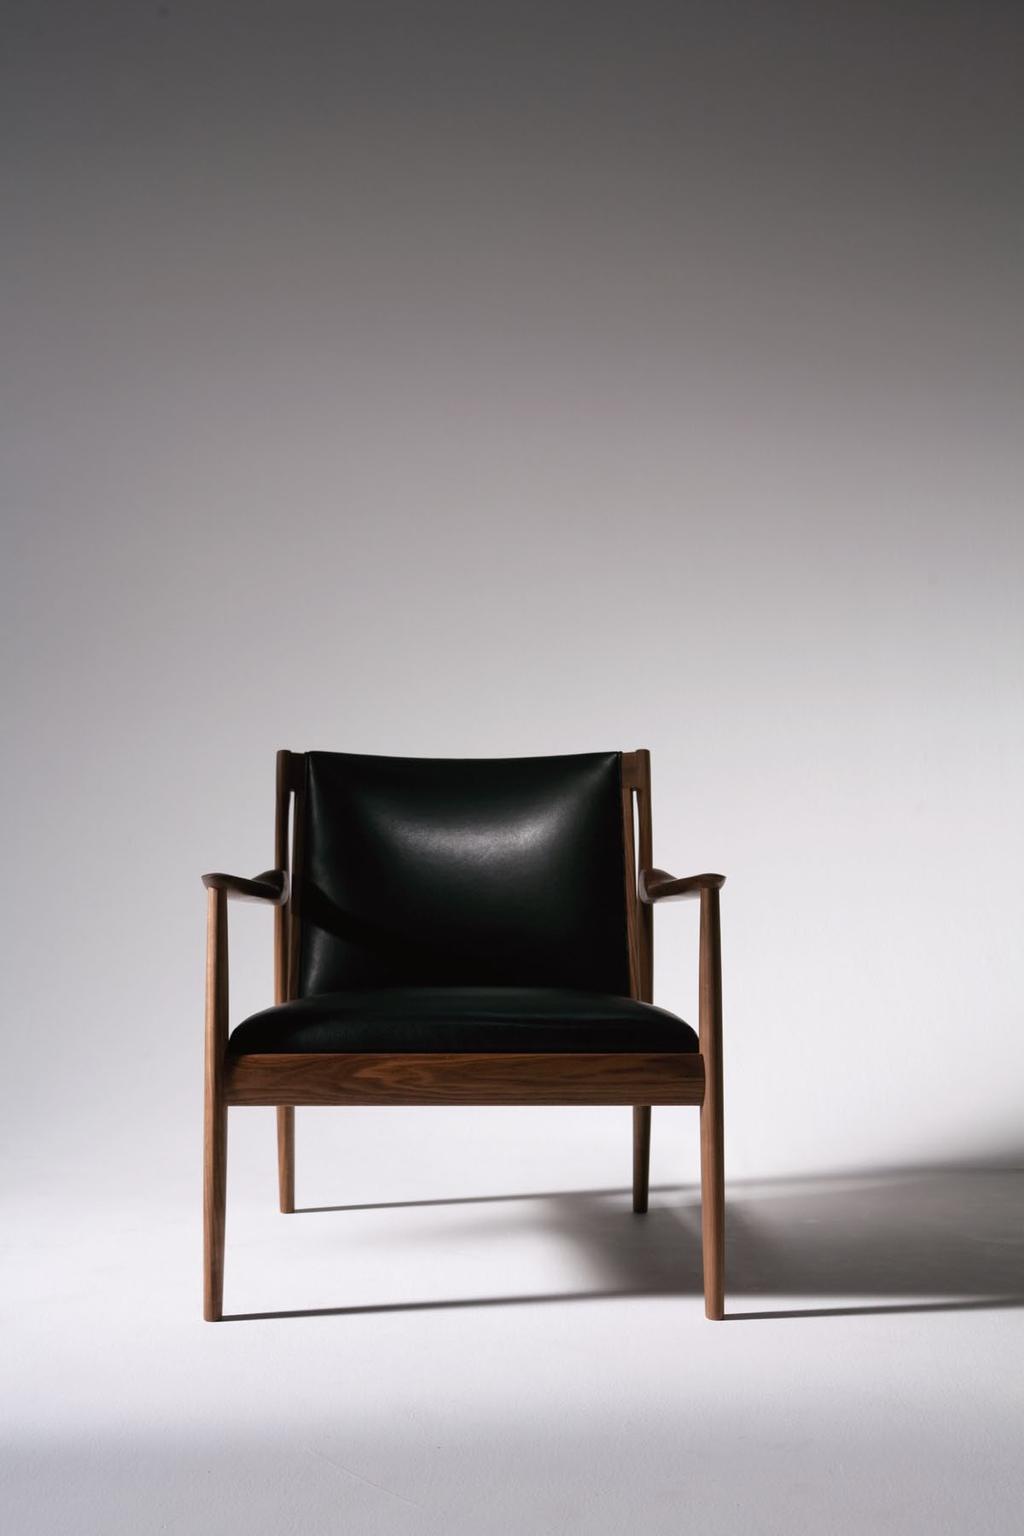 CLAUDE 2013 EASY CHAIR Design : SHINSAKU MIYAMOTO Frame : Walnut oiled finish Seat & Back : Leather The detailing on the sculptured armrests and the lines of the legs are unique, and especially the